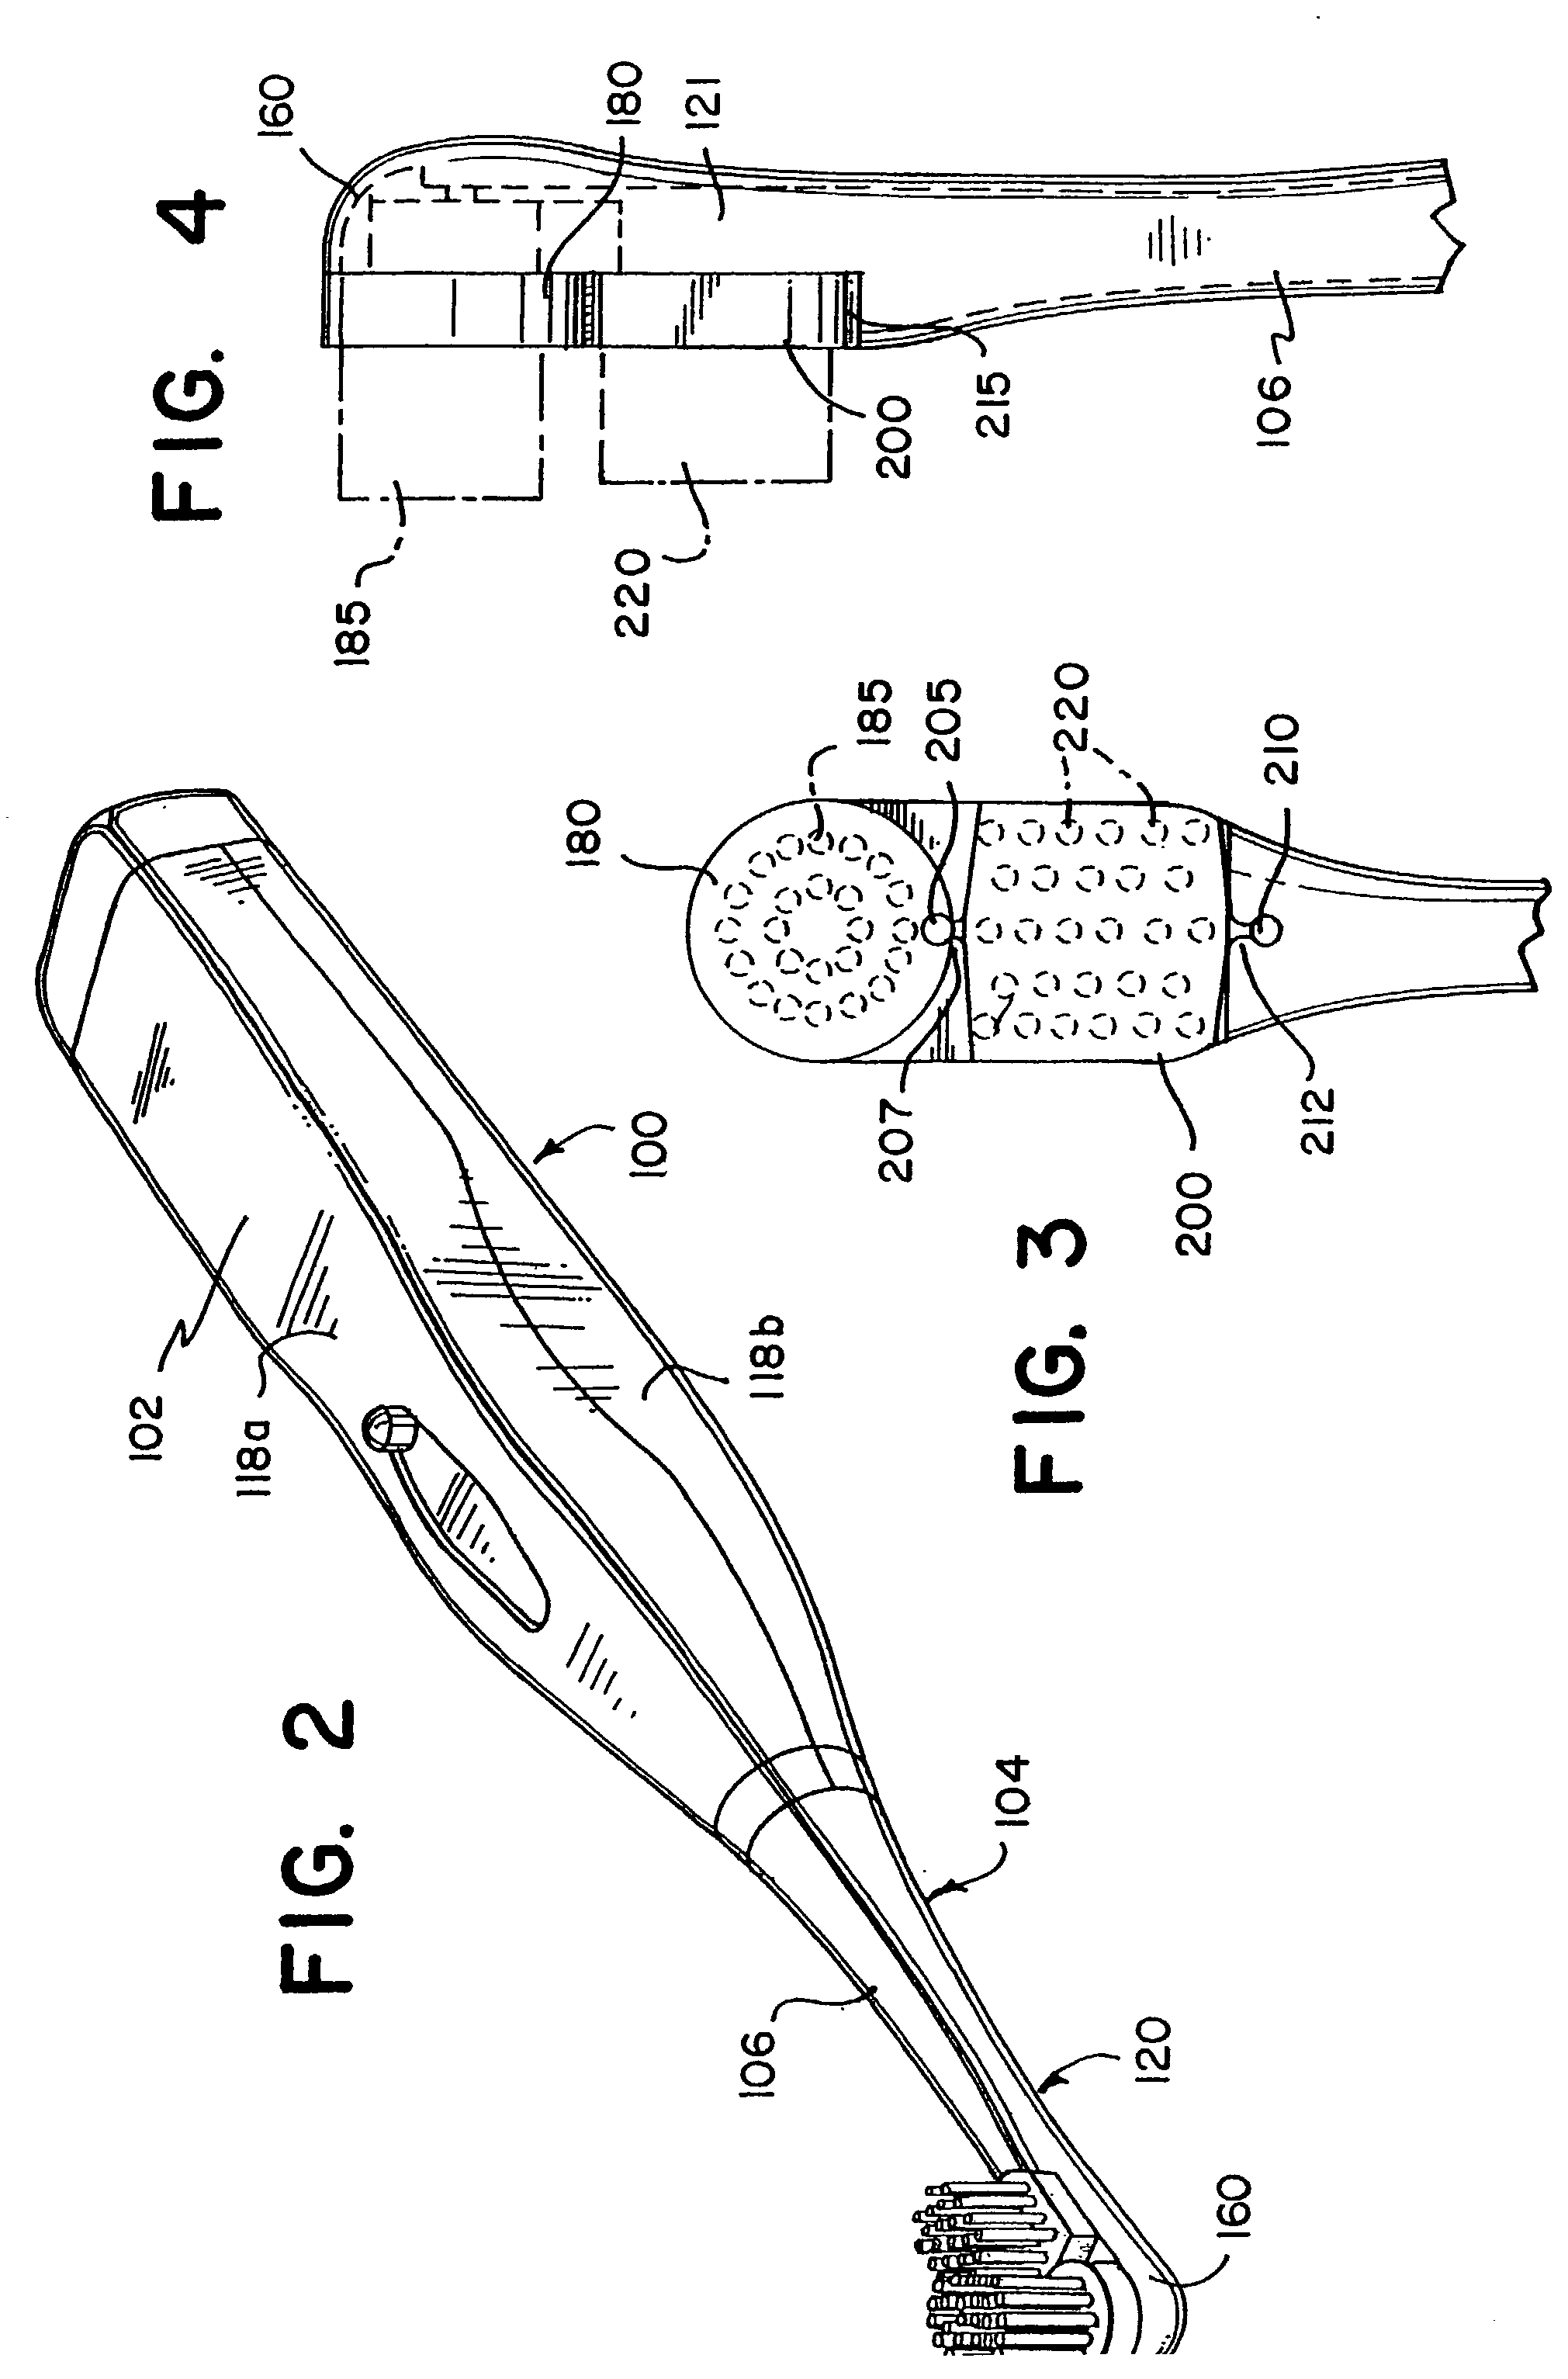 Toothbrush with sectorial motion